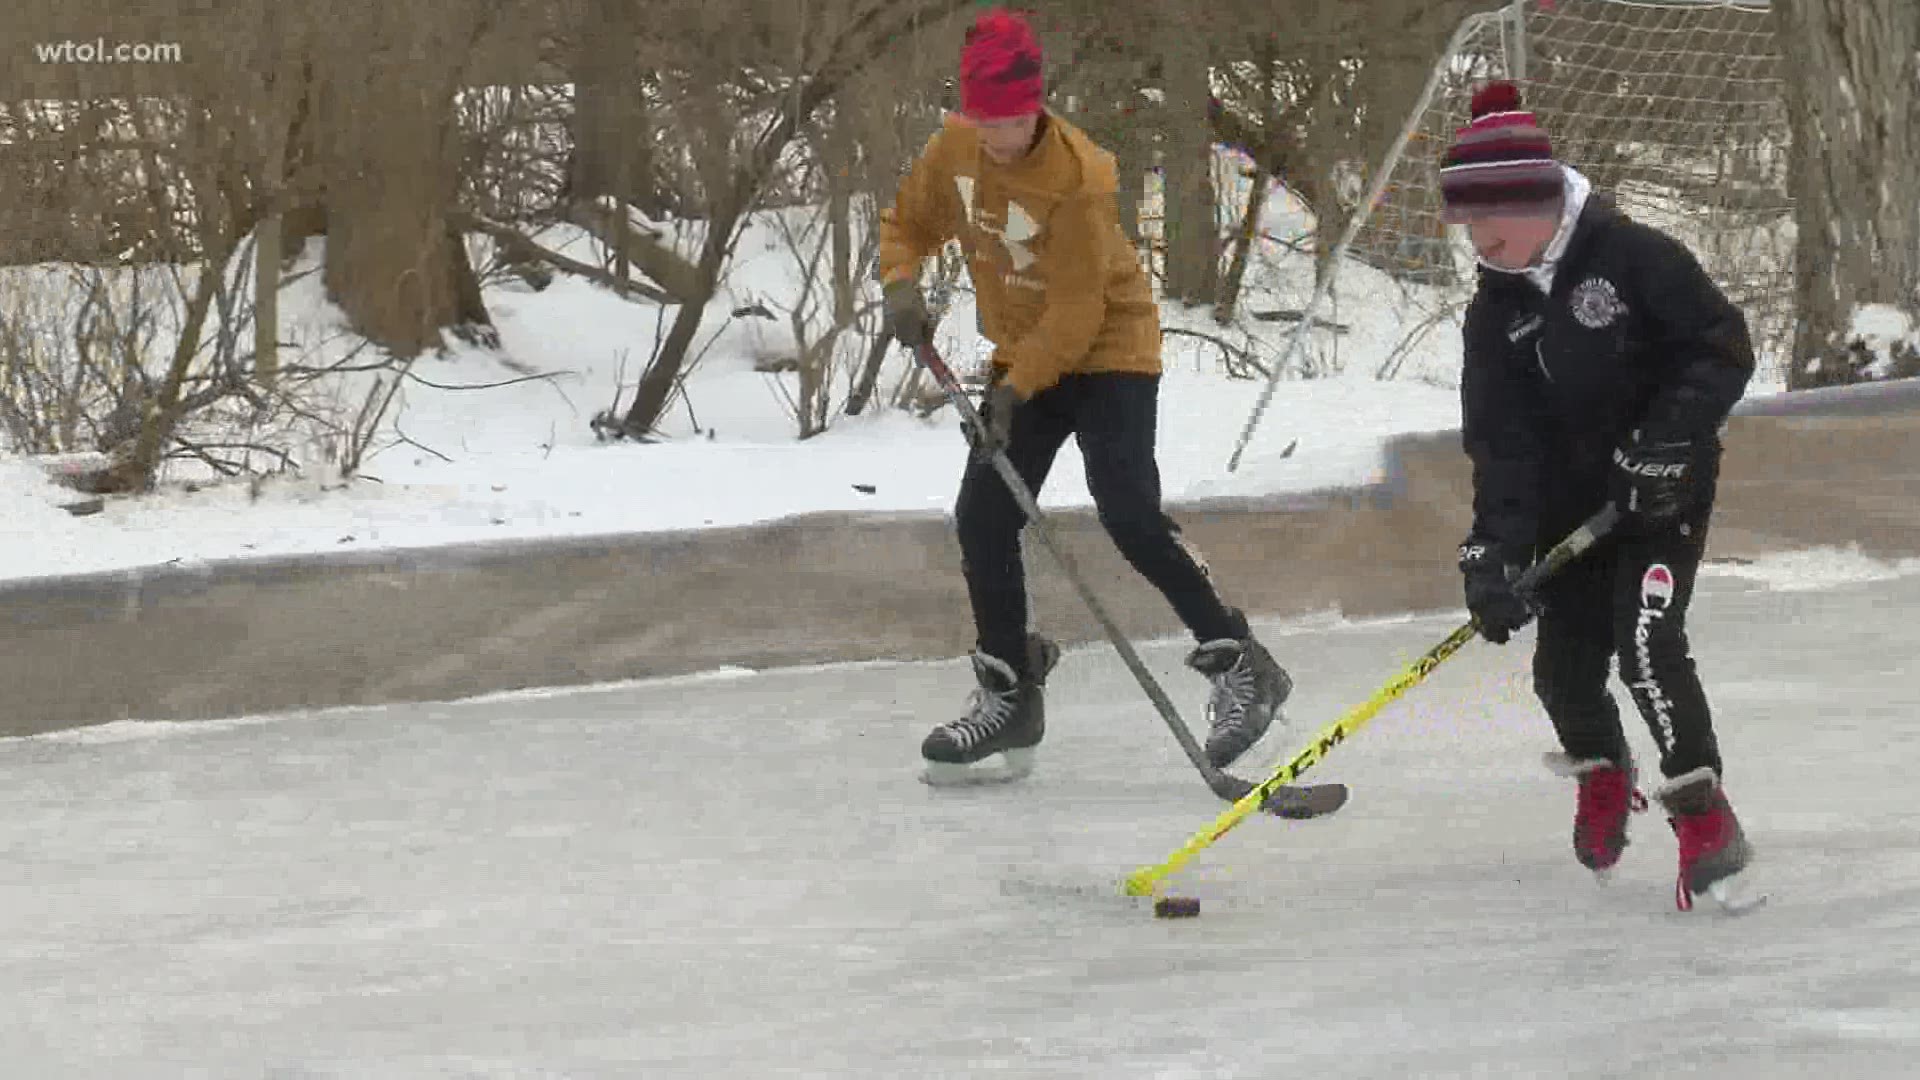 Mark Robson wanted to get in a little extra ice time for his sons. His solution was building a backyard hockey rink for the boys to work on their skills and cellys.